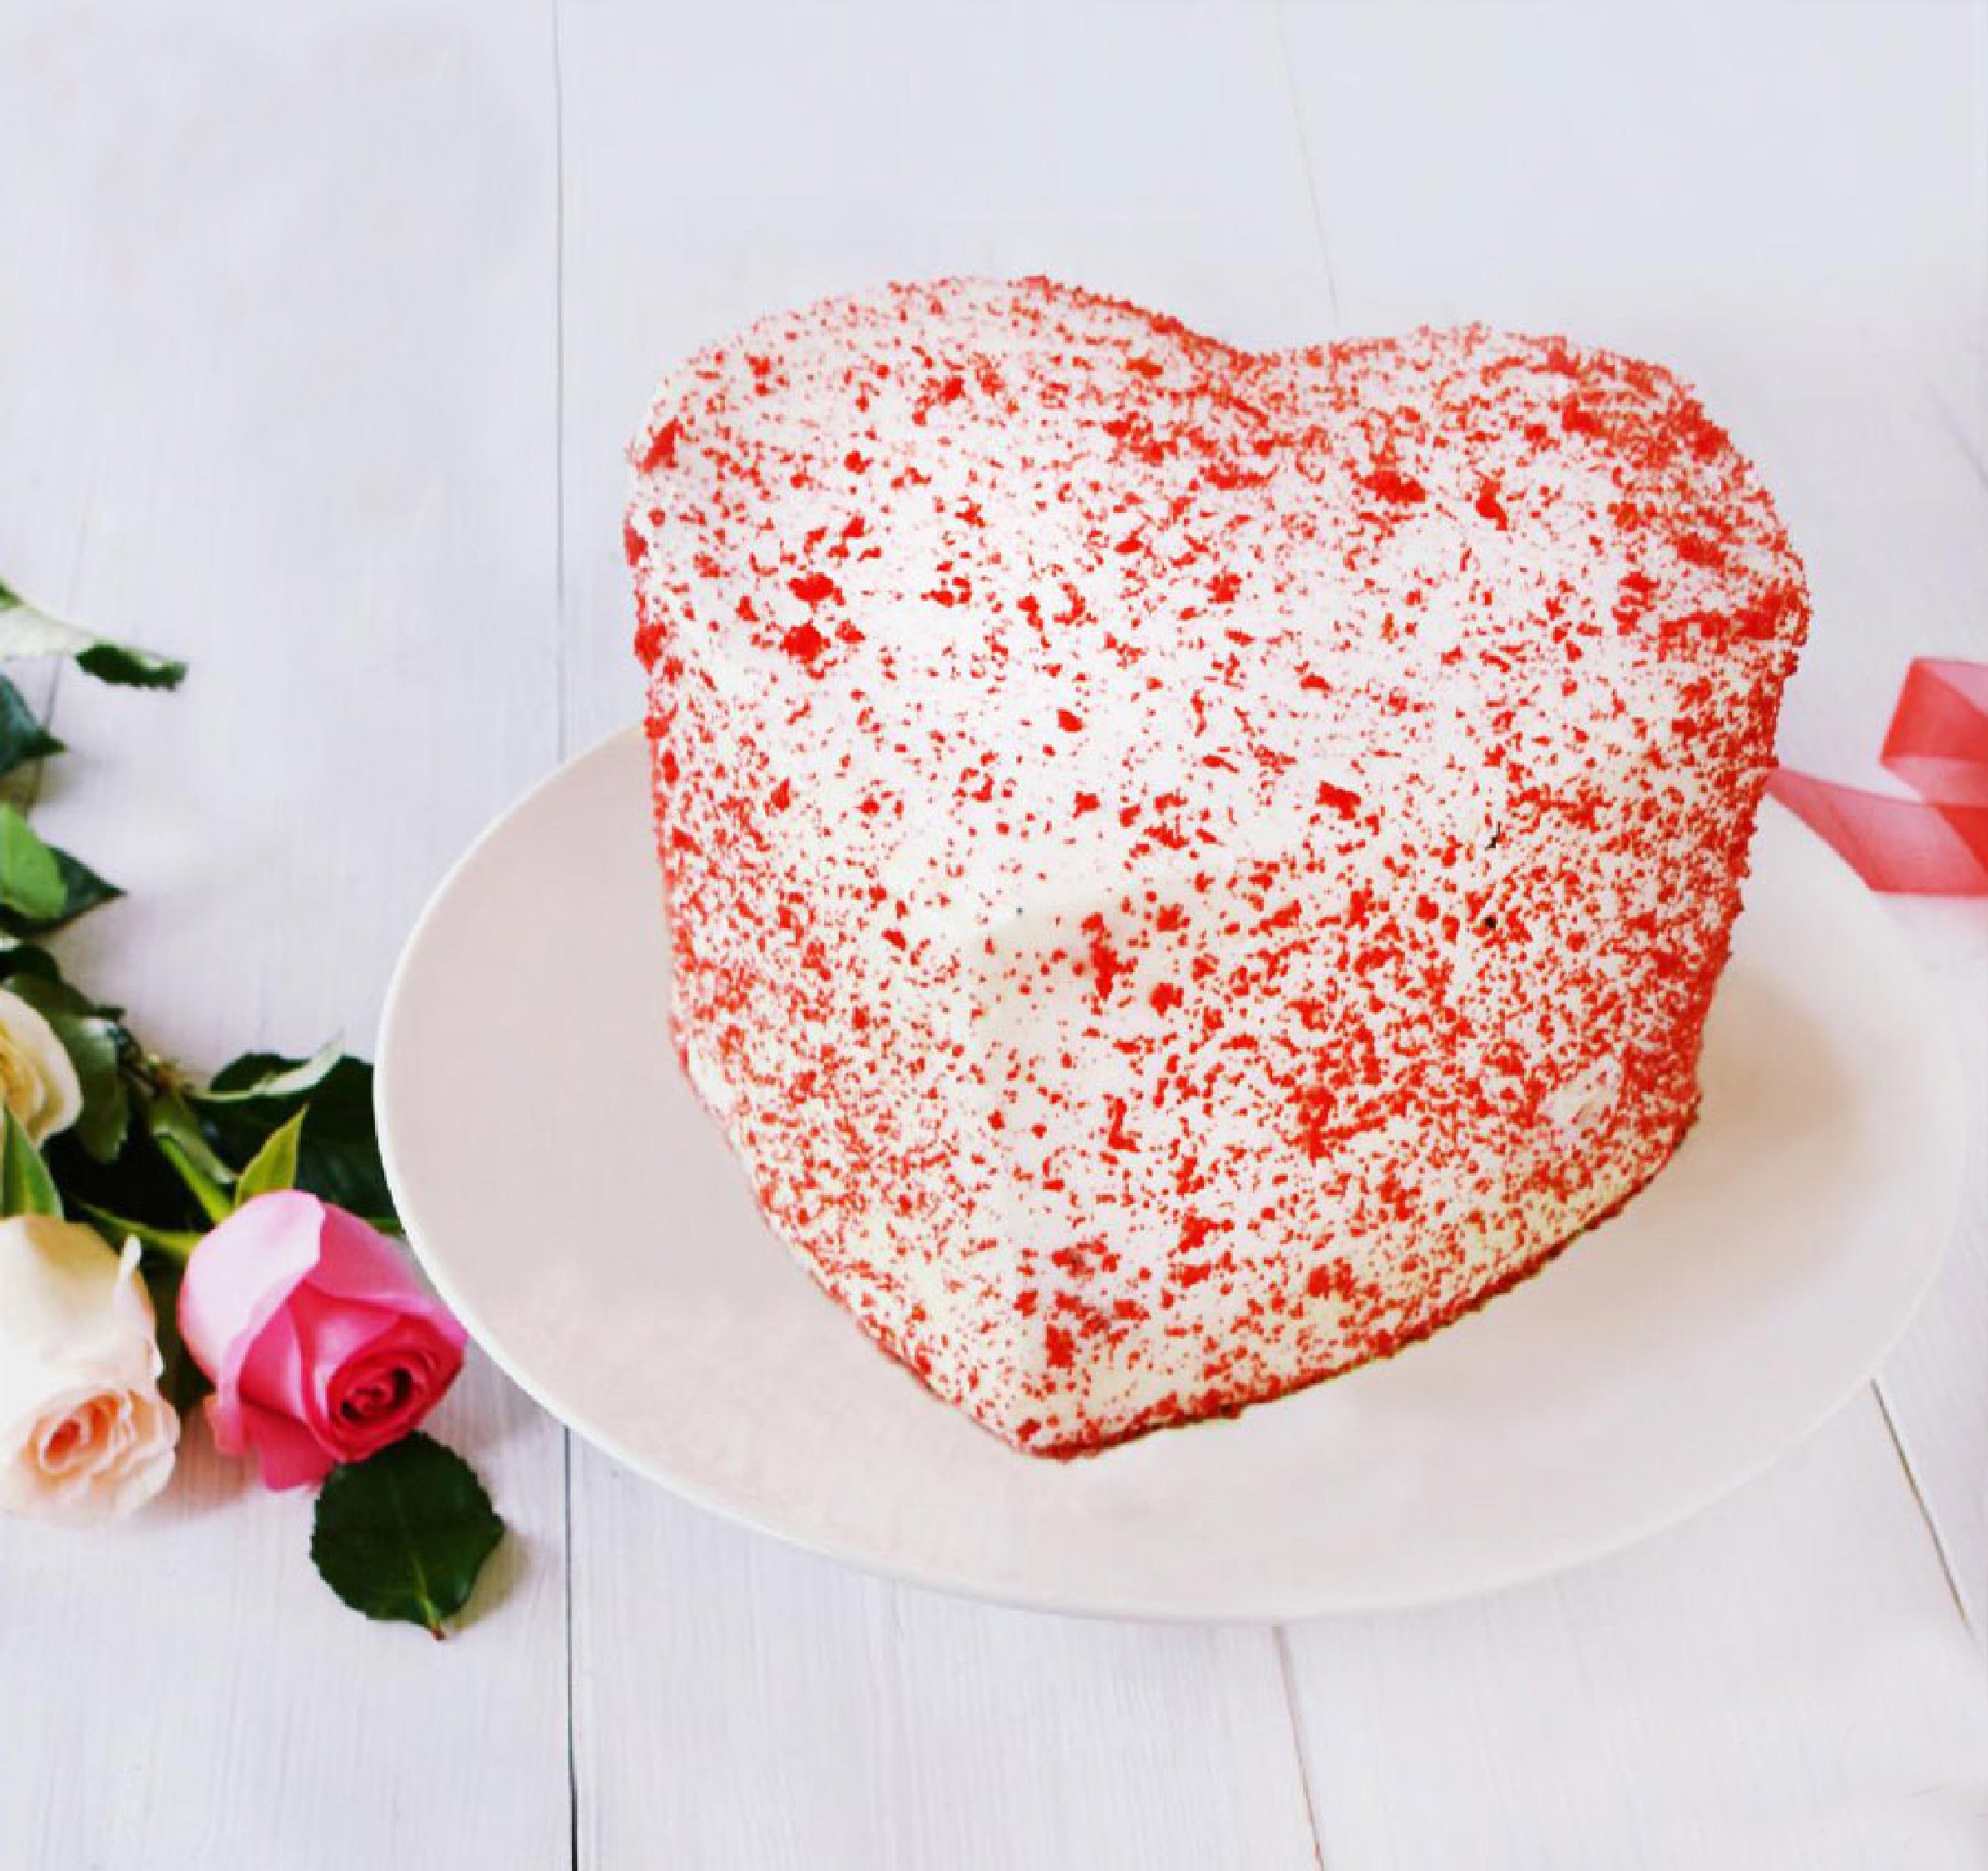 All-Products, Cakes, Celebrations, Occassions, Patisserie, Valentines-2022